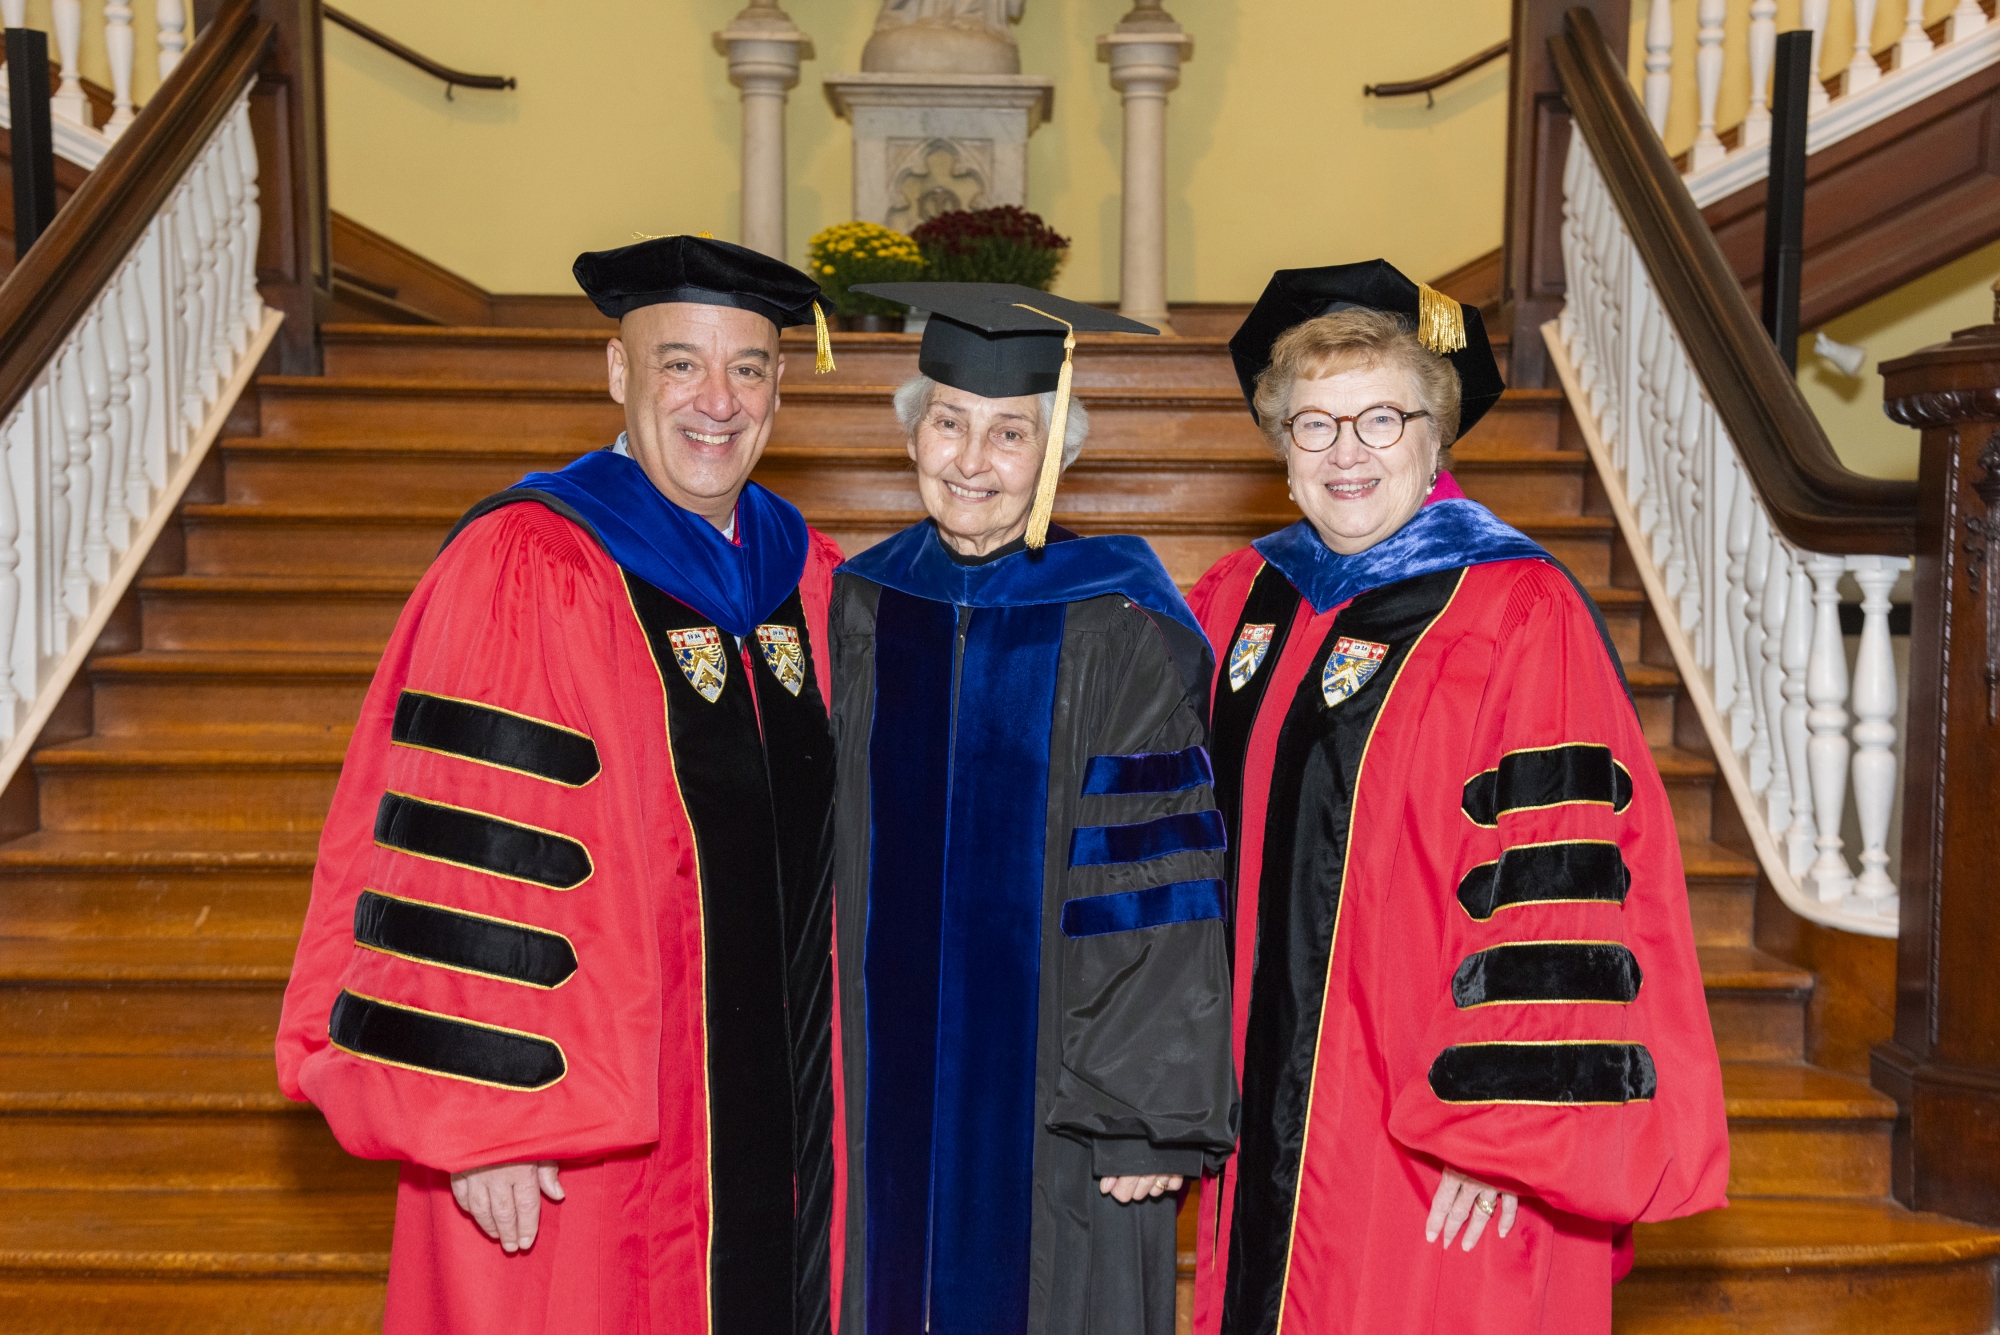 Three generations of CHC presidents came together as former living presidents, Sister Matthew Anita MacDonald and Sister Carol Jean Vale, Ph.D., joined Dr. Latimer for the Inauguration ceremony.